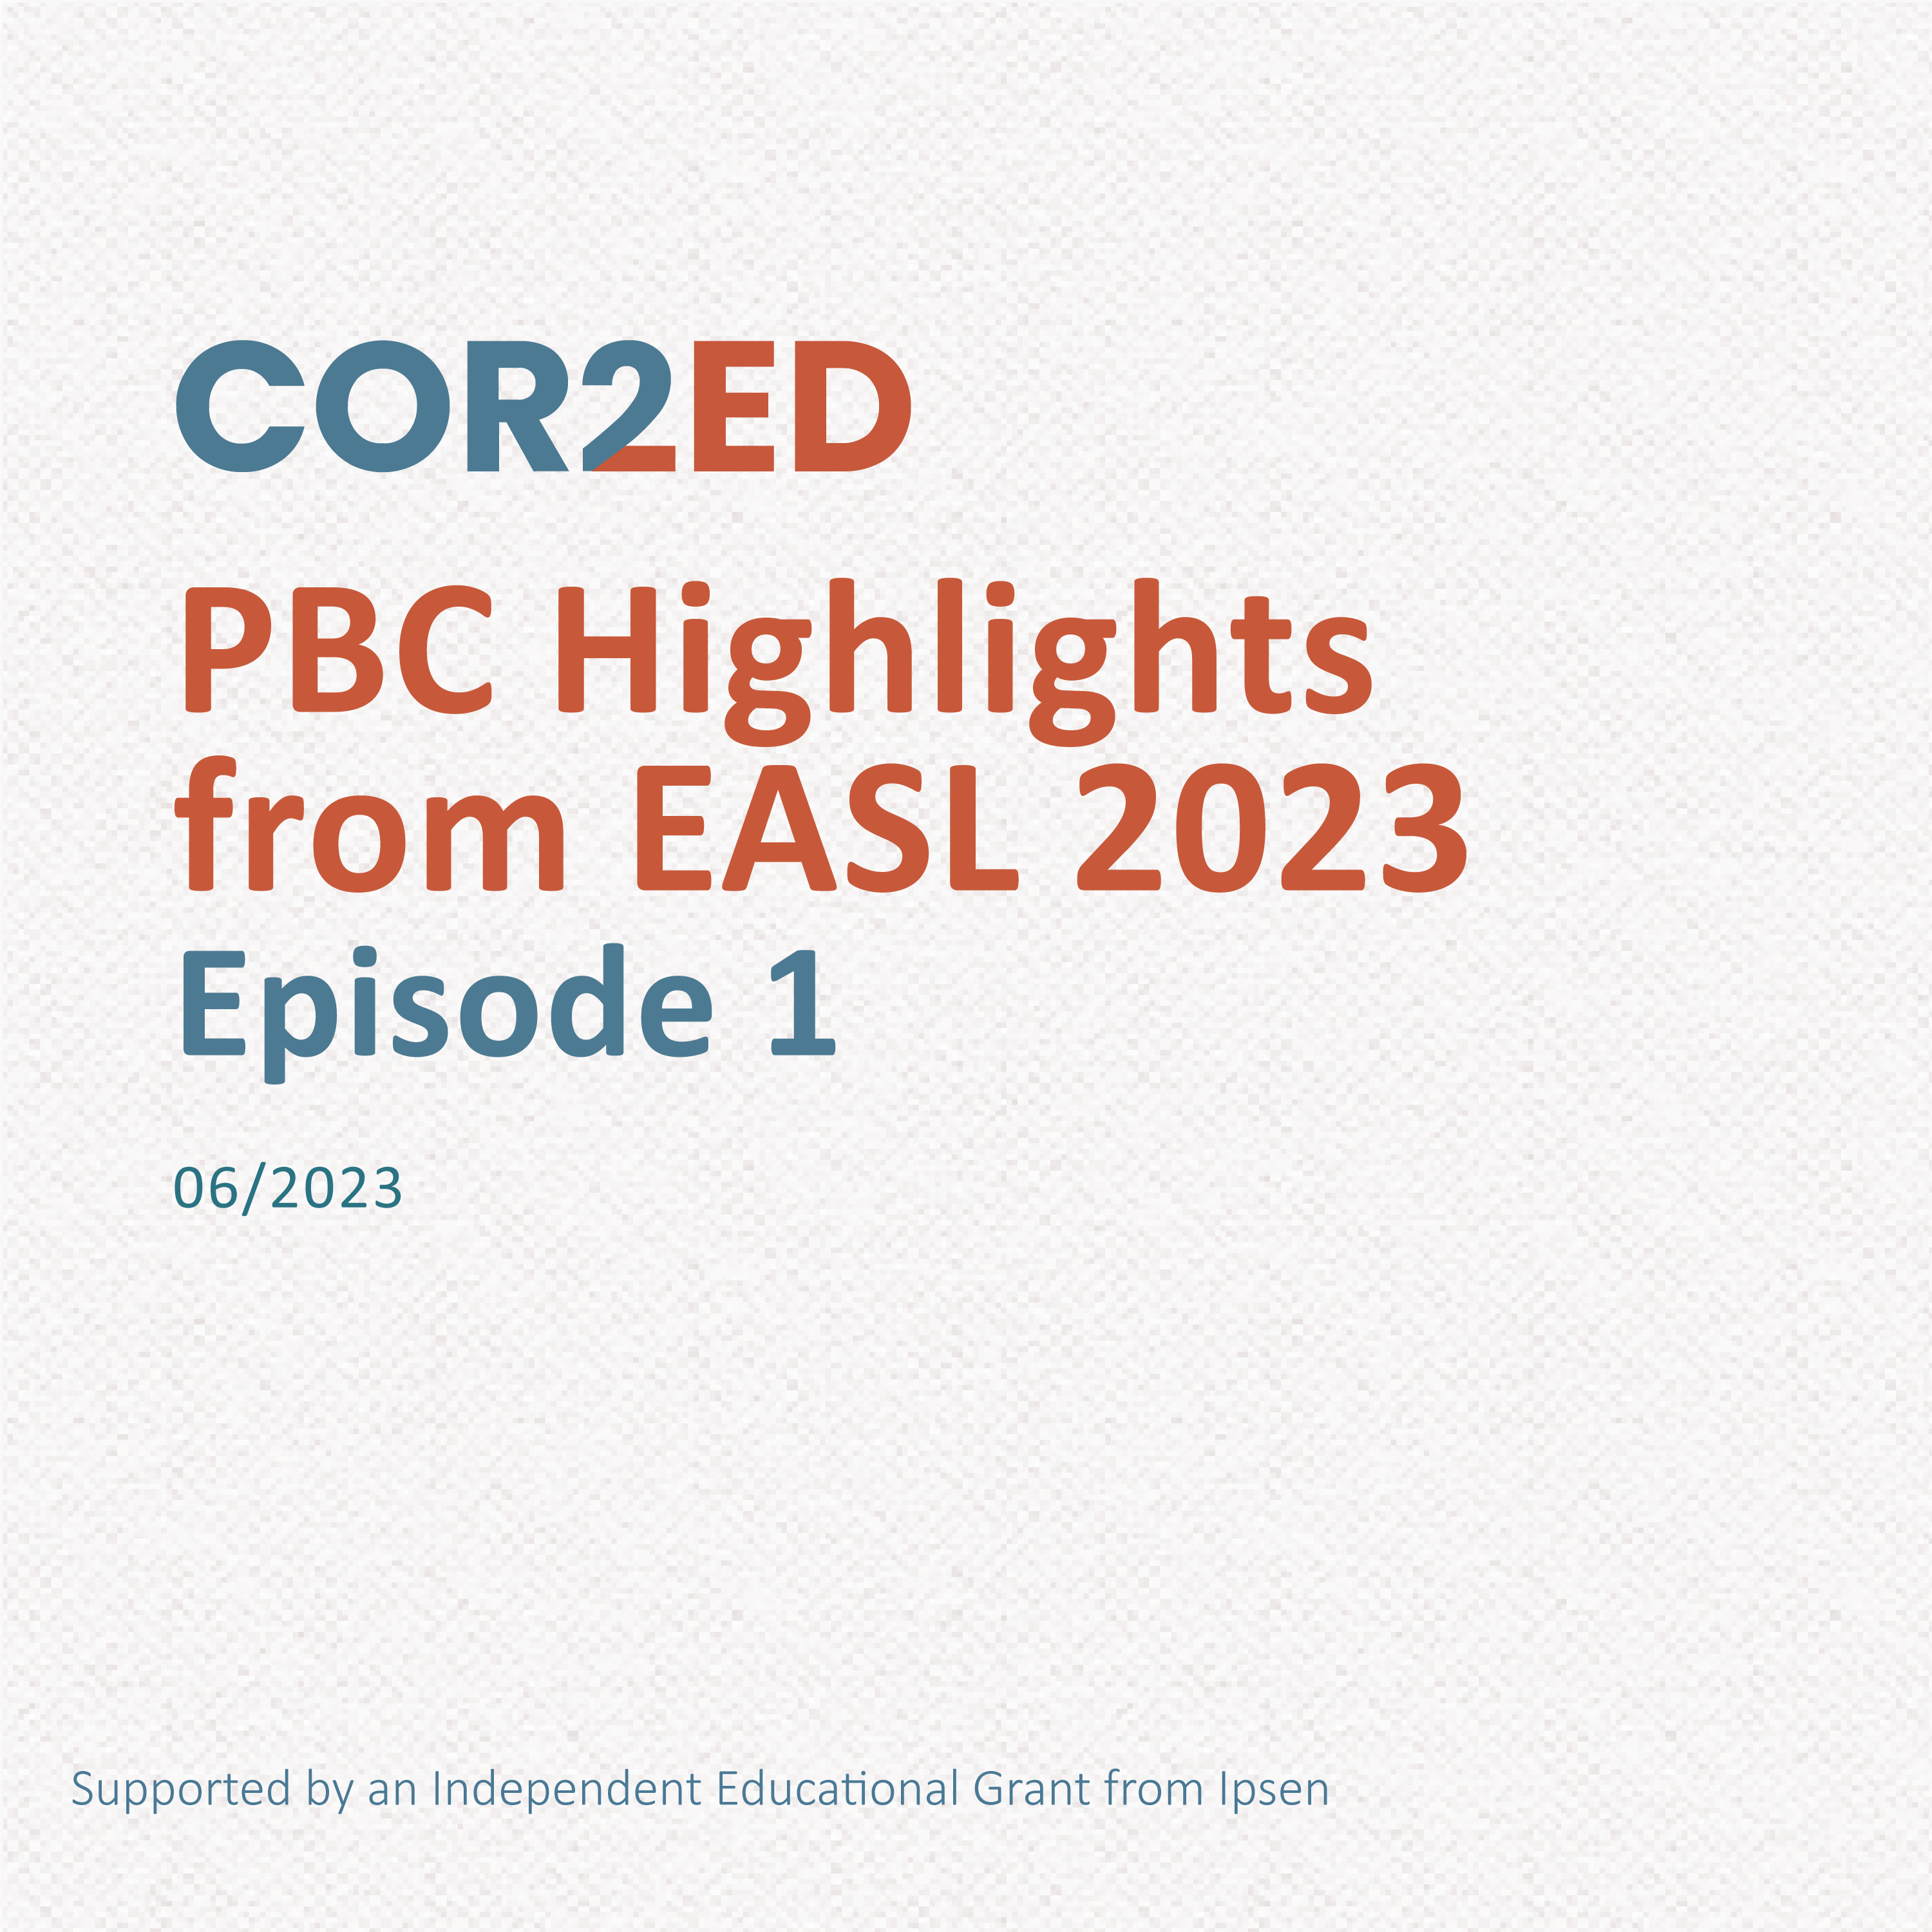 PBC Highlights from EASL 2023: Episode 1